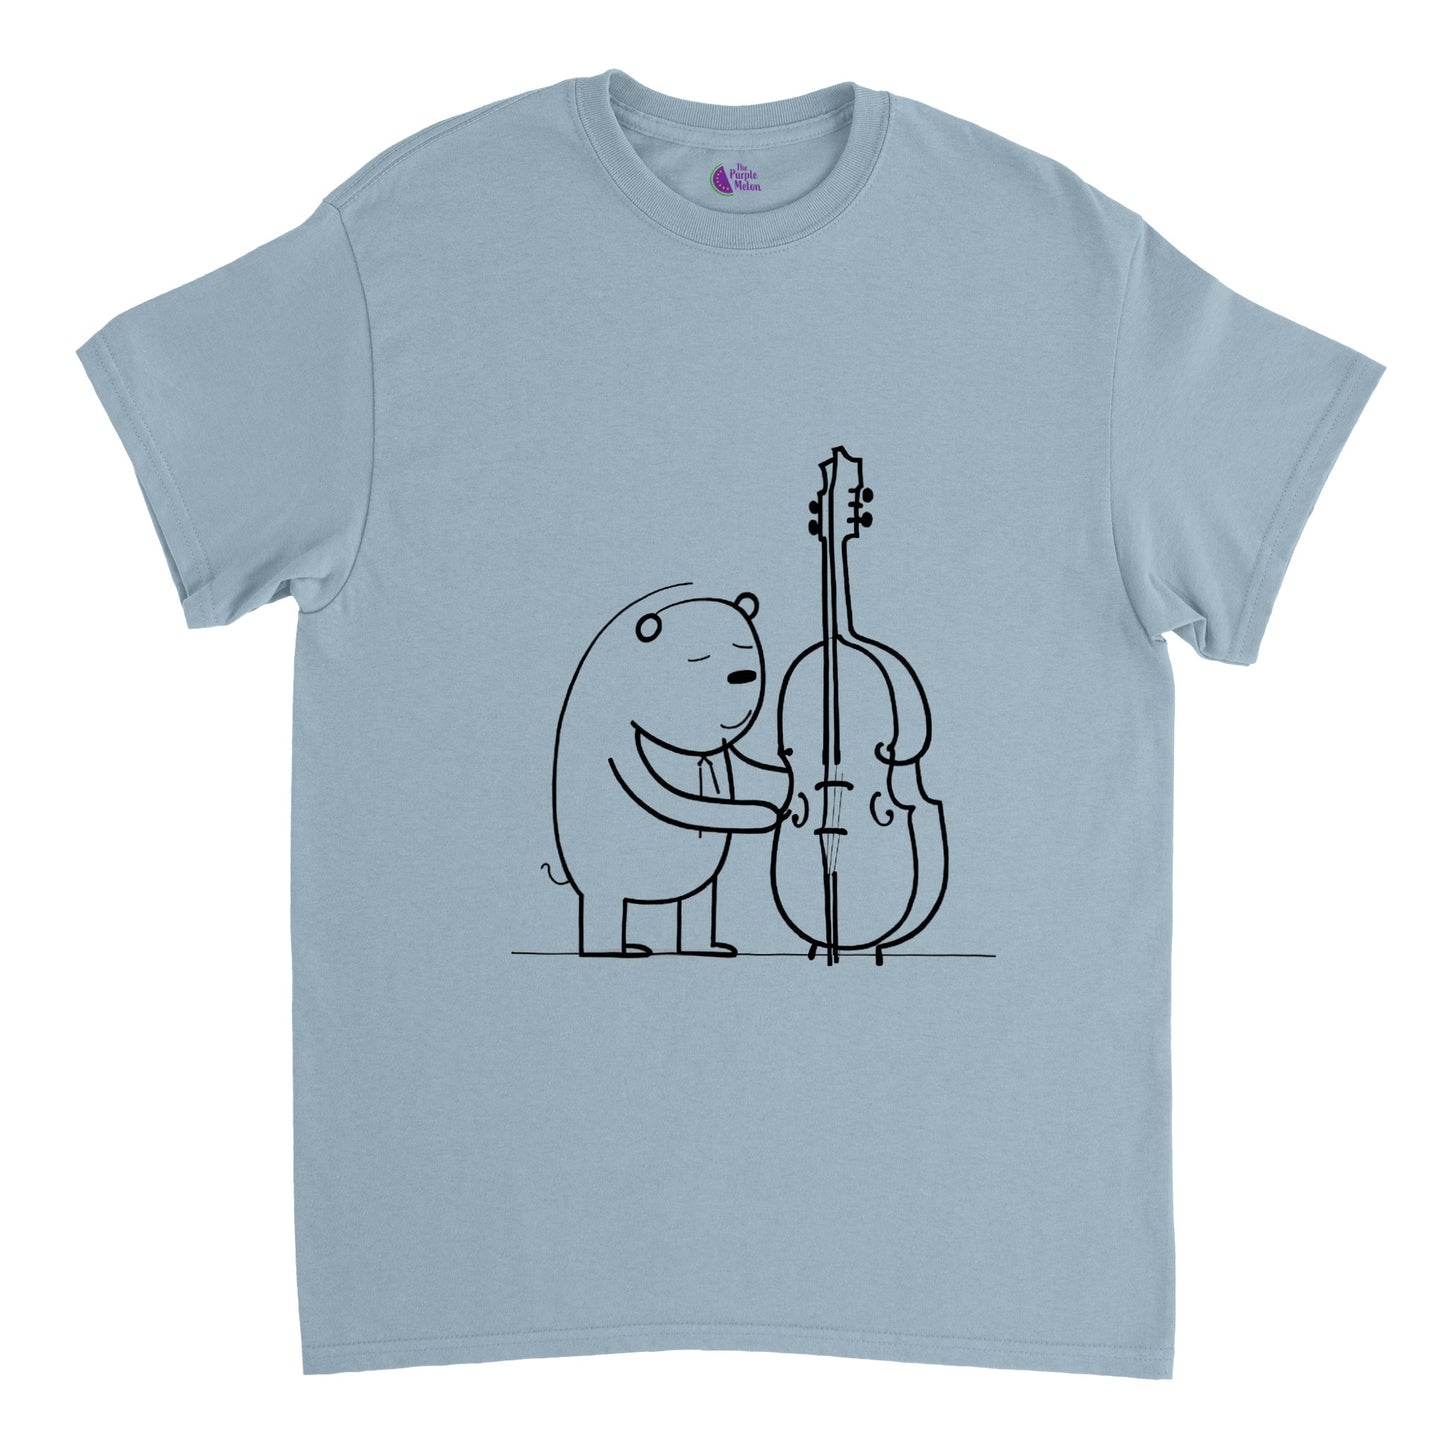 Sky blue t-shirt with a bear playing a double bass print